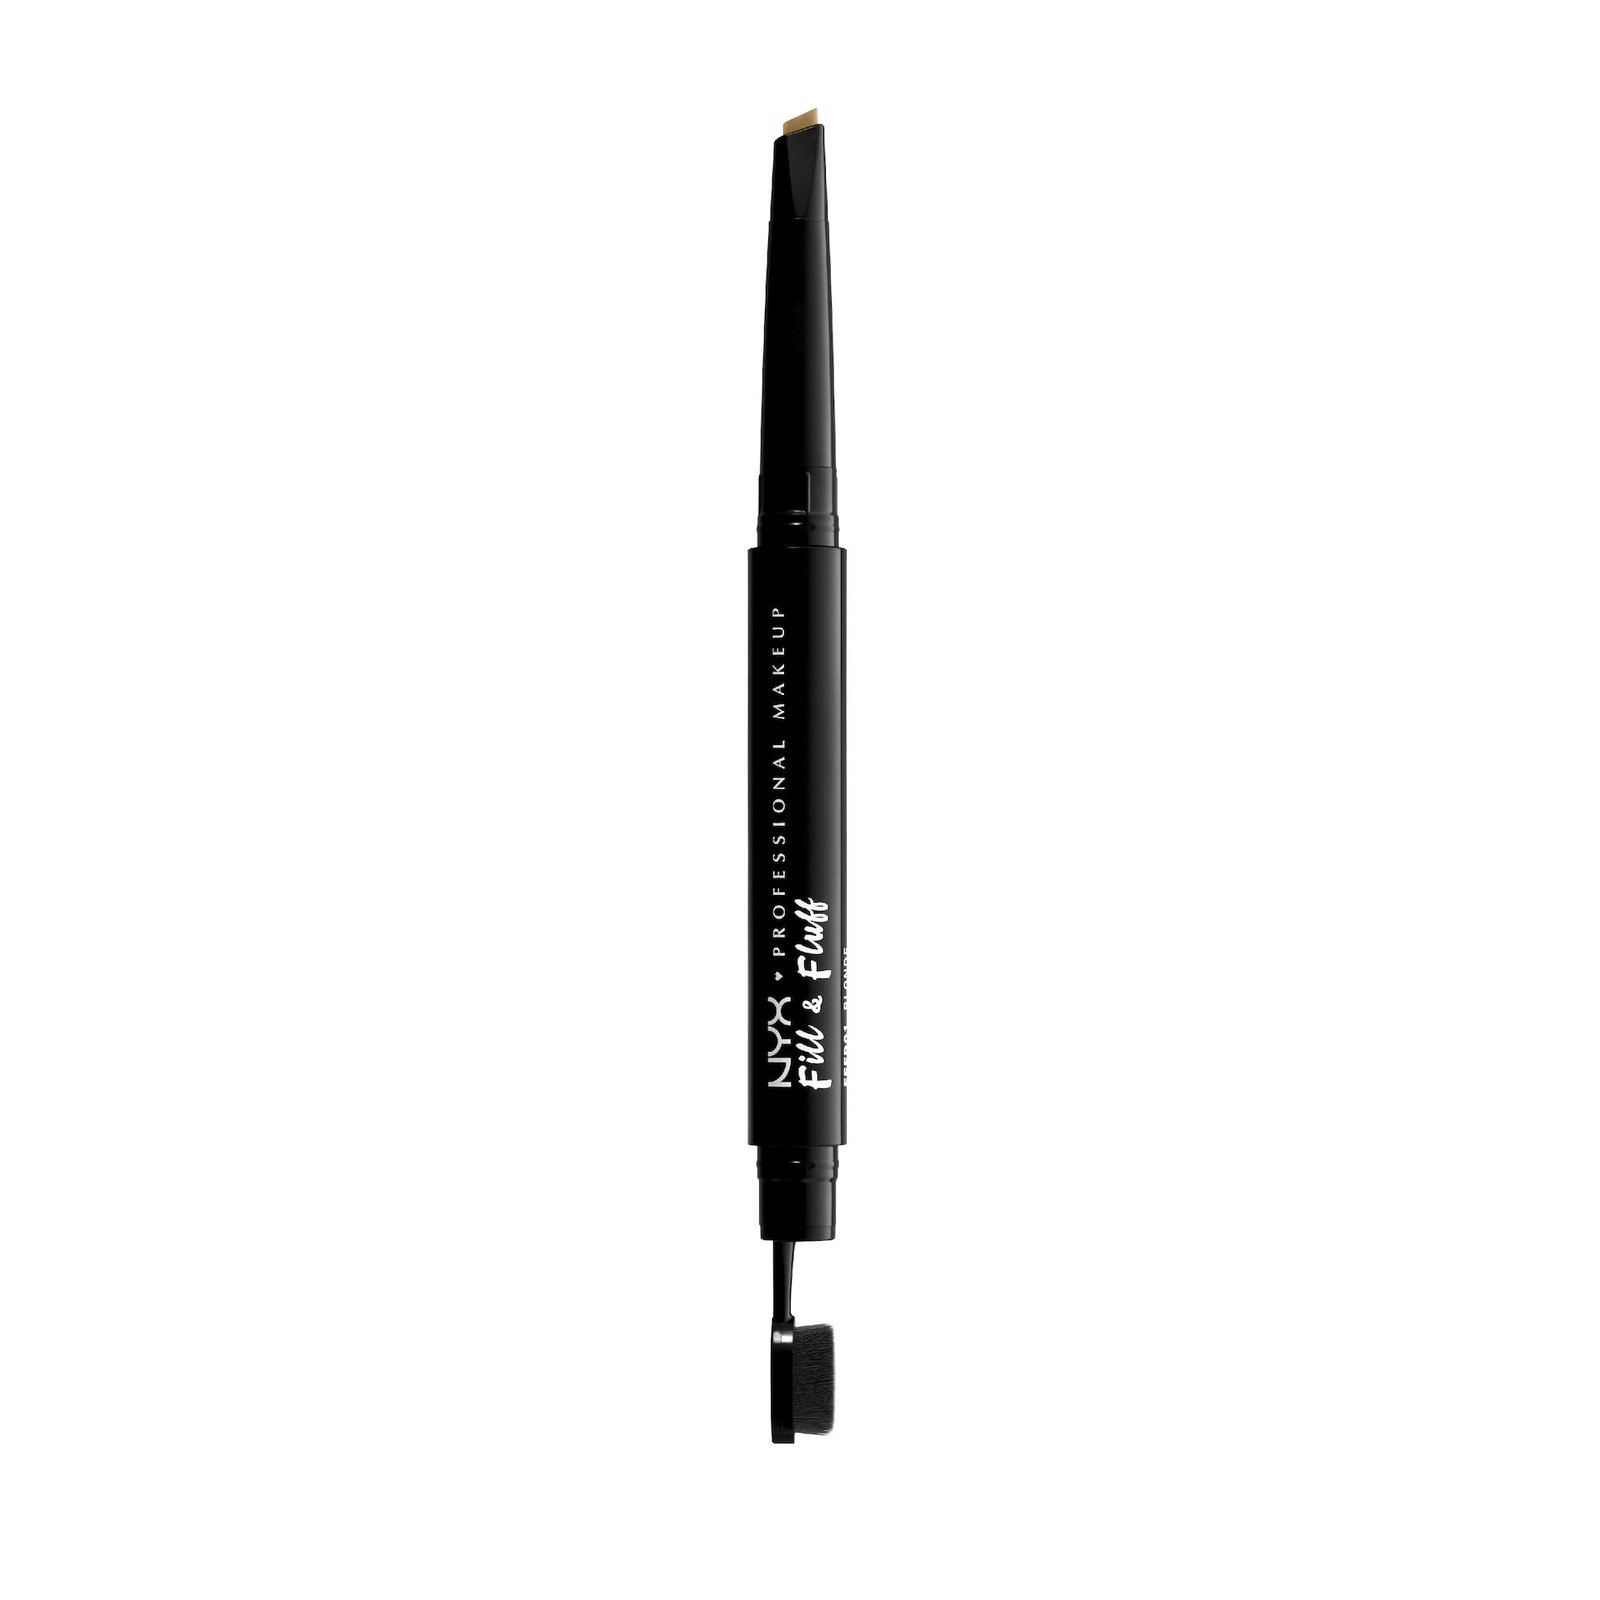 NYX Professional Makeup Fill & Fluff Eyebrow Pomade Pencil 1 Blonde 0,2g